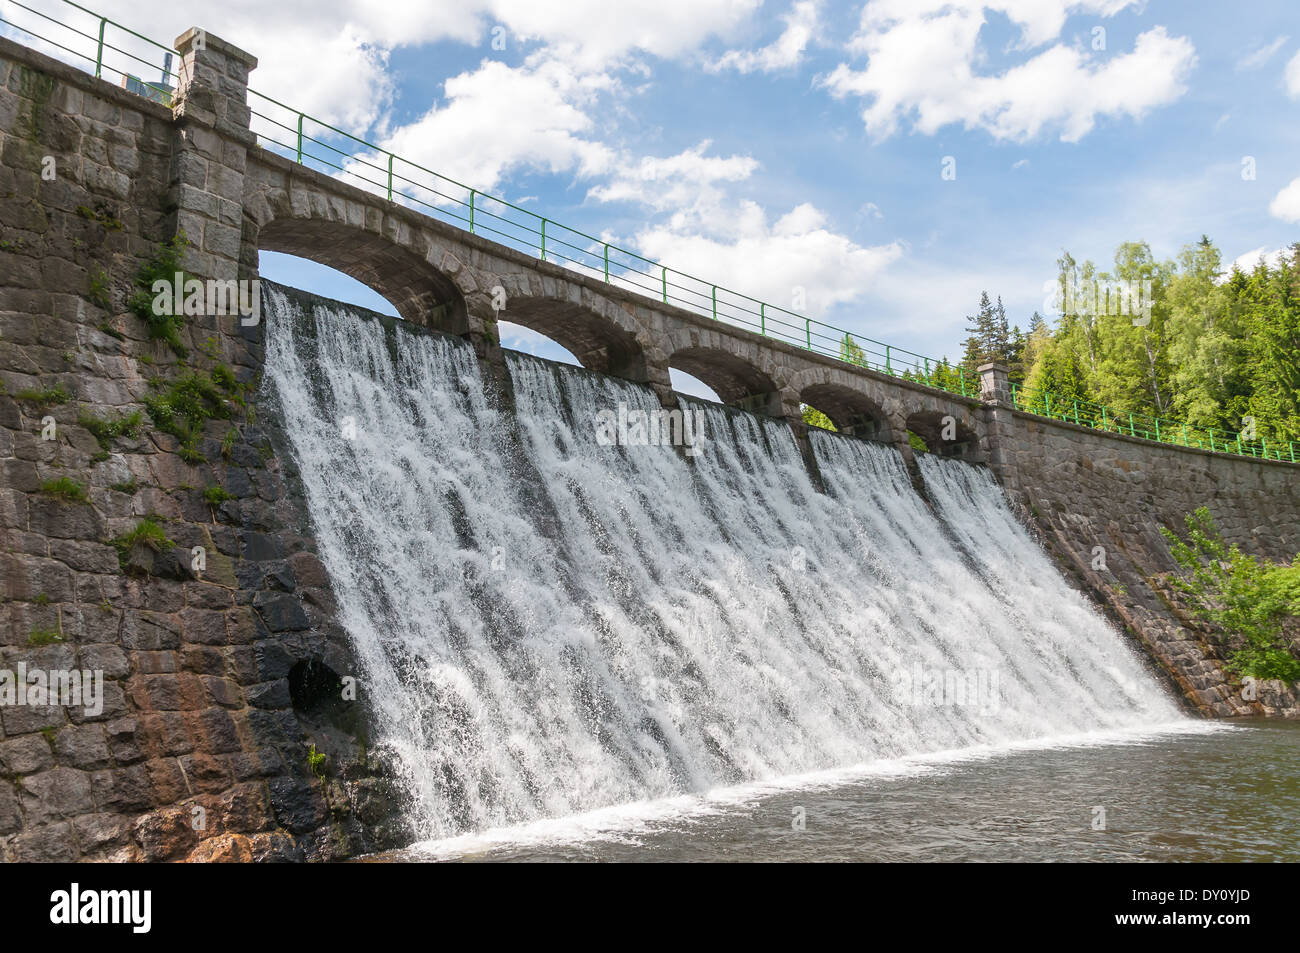 Dam on the Lomnica River in Karpacz, Poland Stock Photo